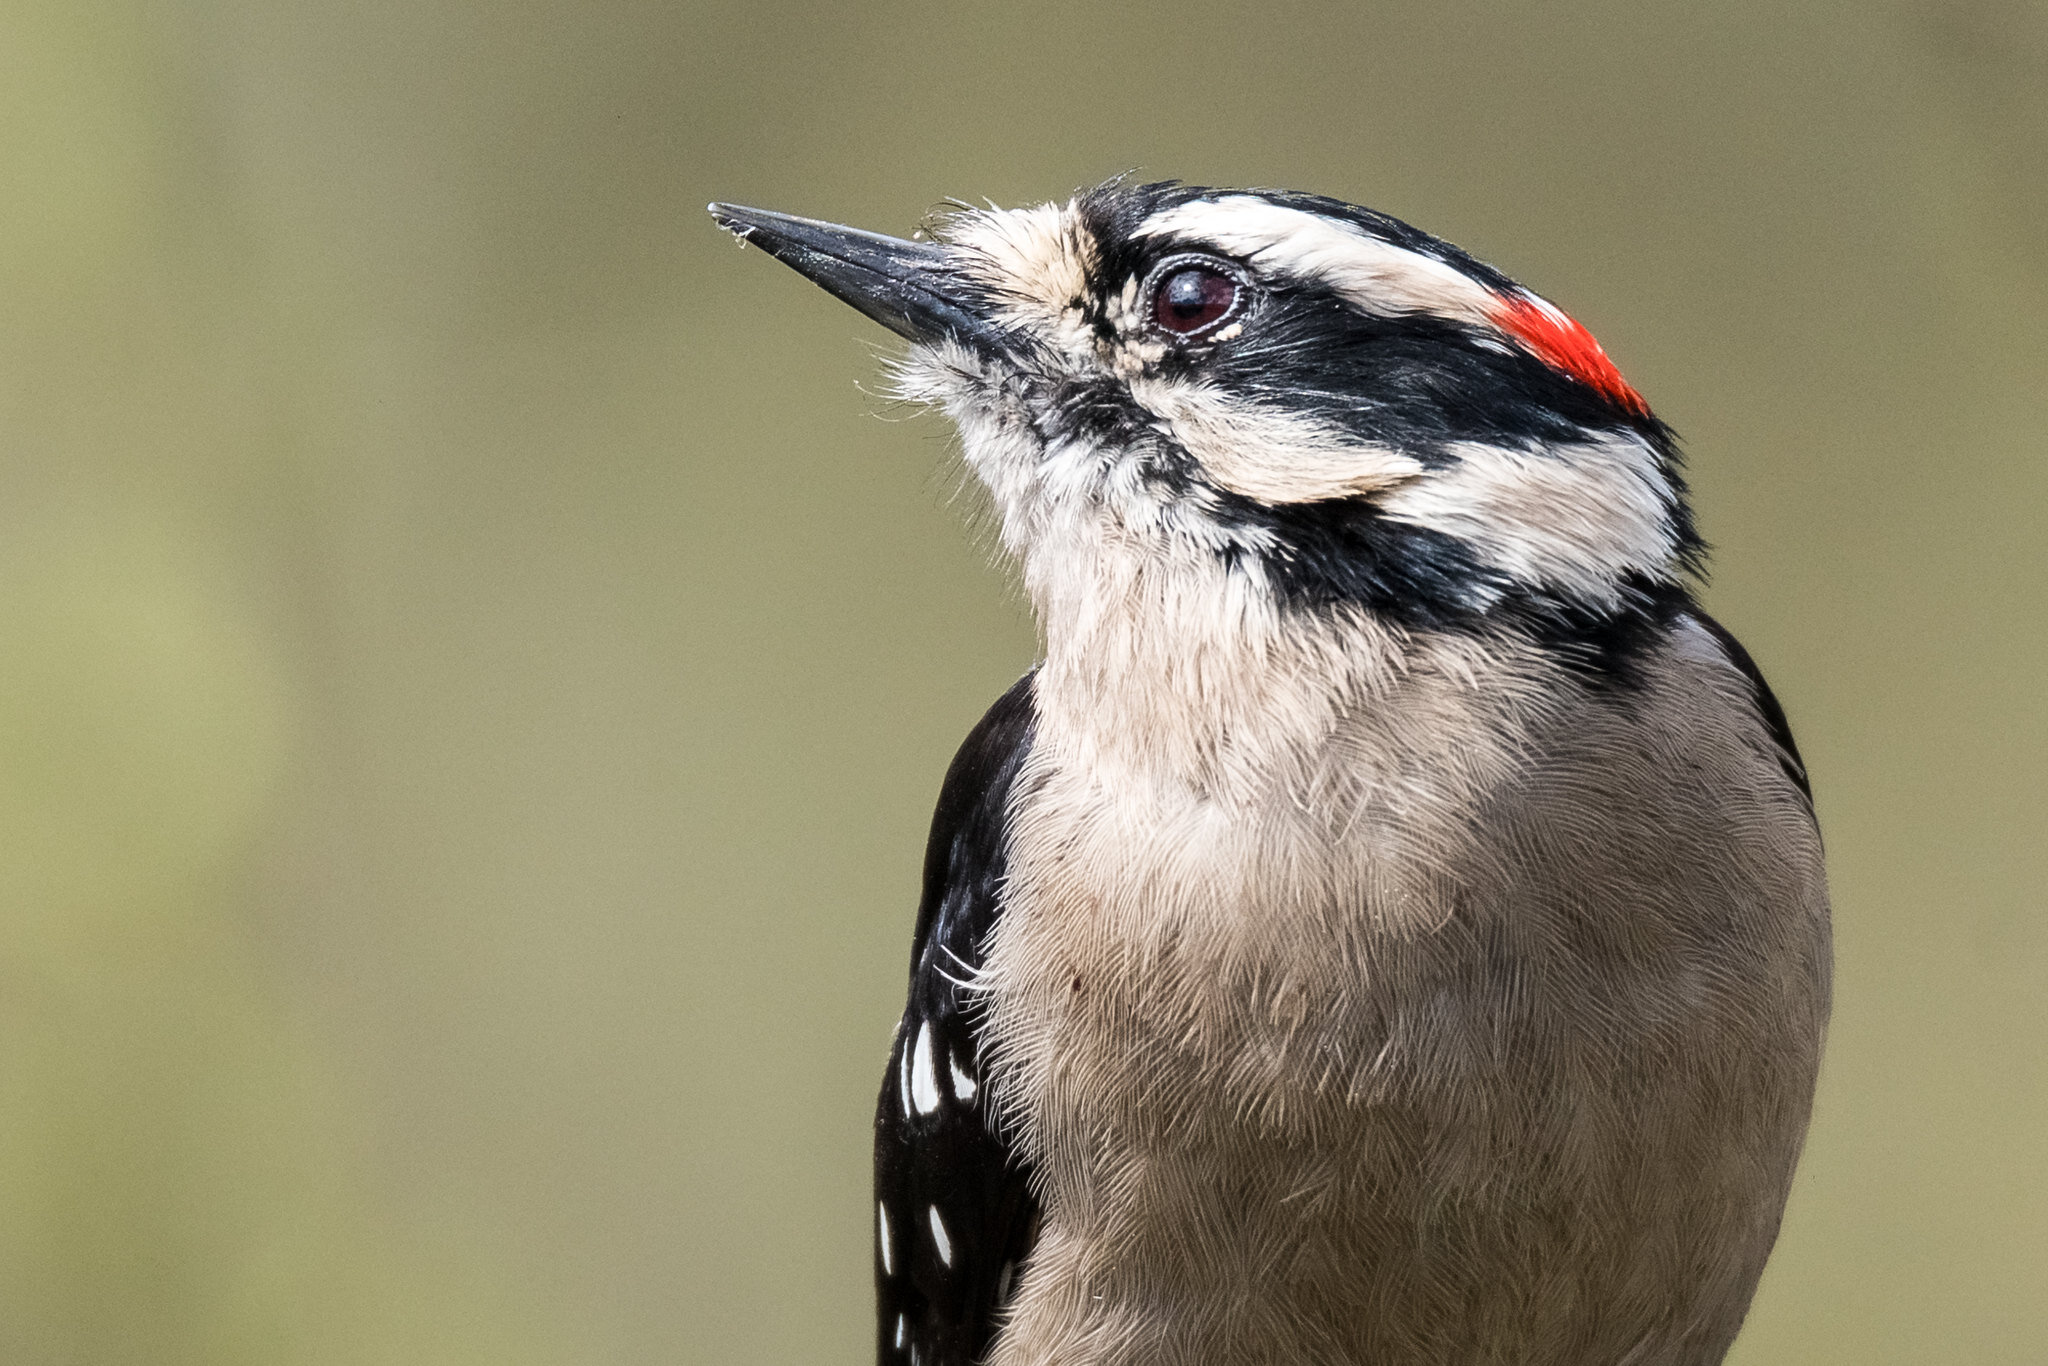 Drumming in woodpeckers is neurologically similar to singing in songbirds